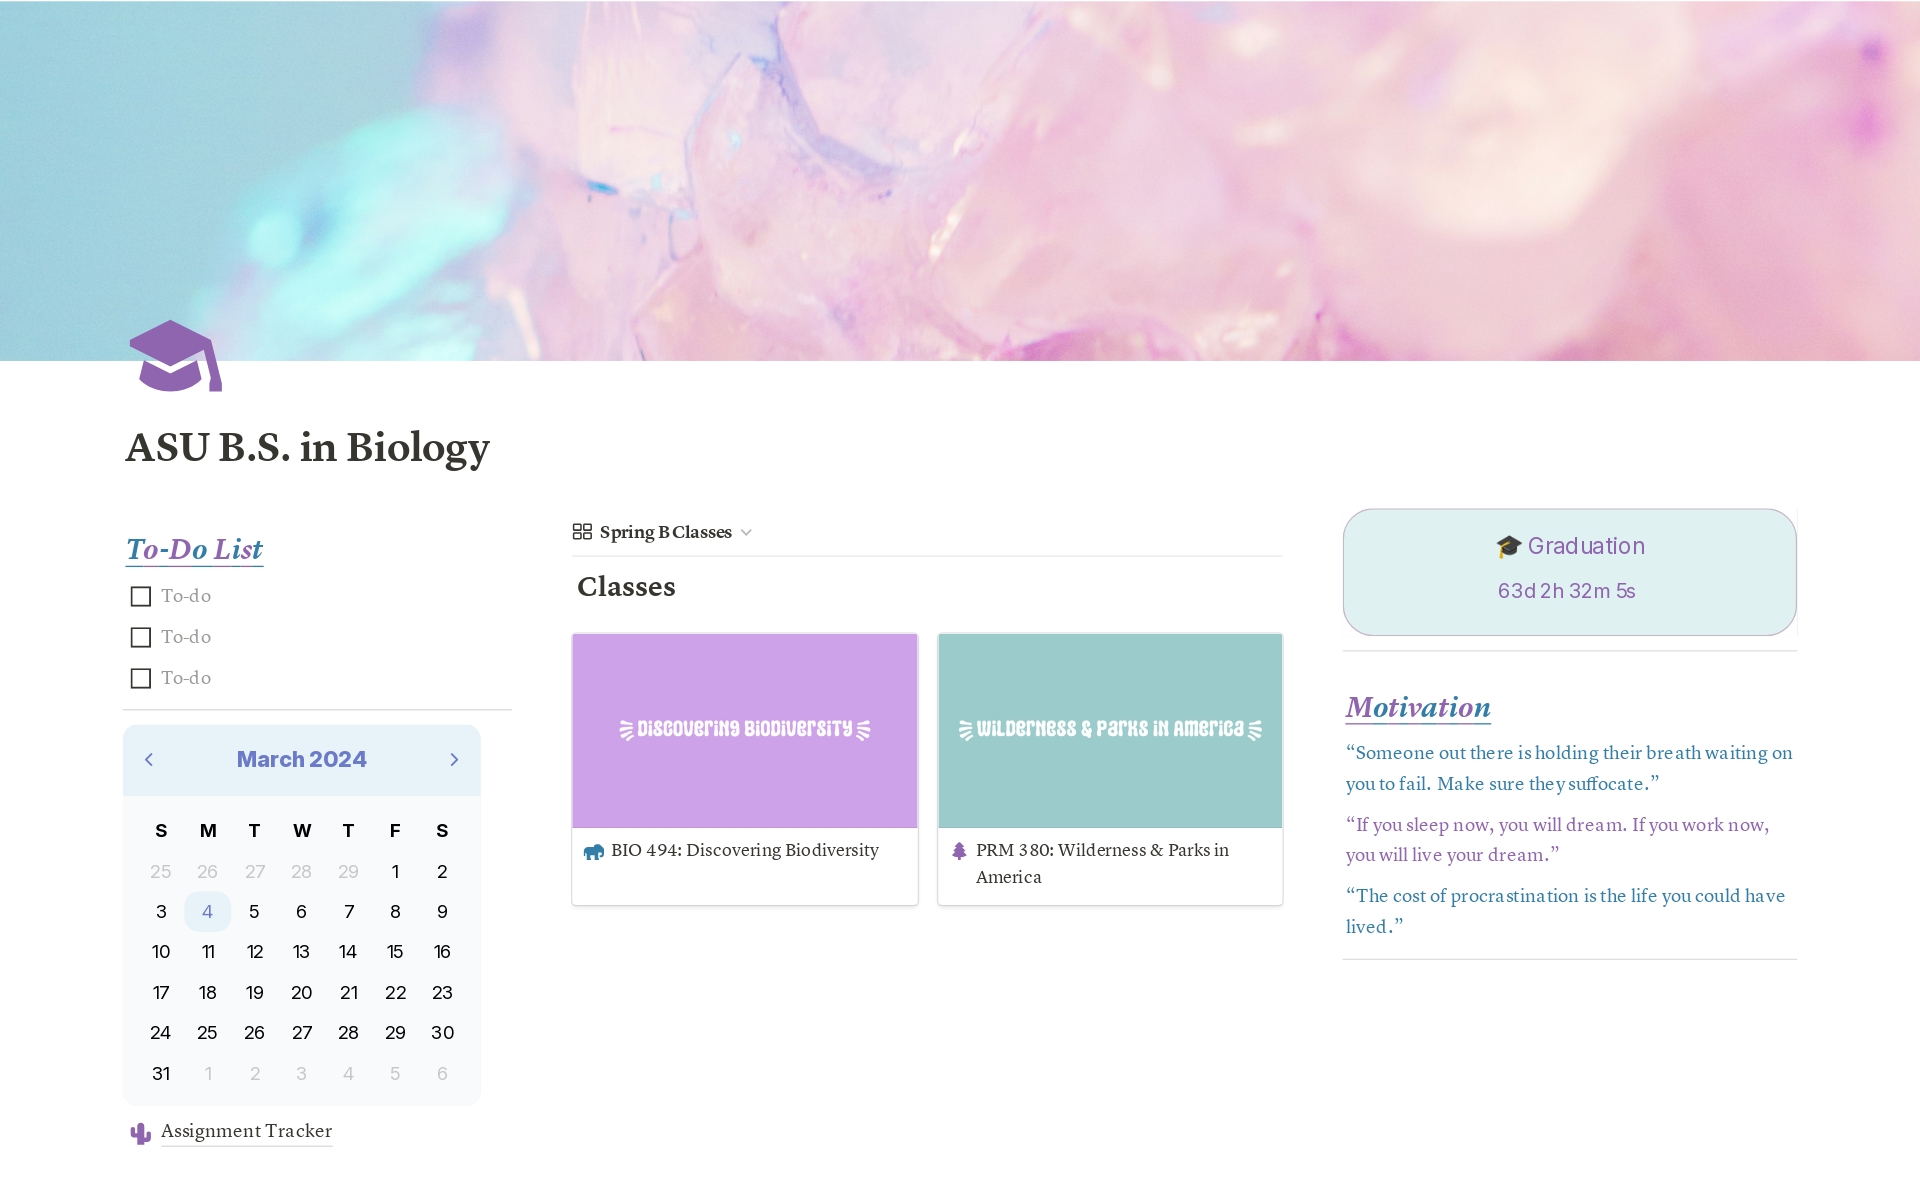 This template allows you to organize your to-do's by class, take notes for your classes, and store important course information in one place.